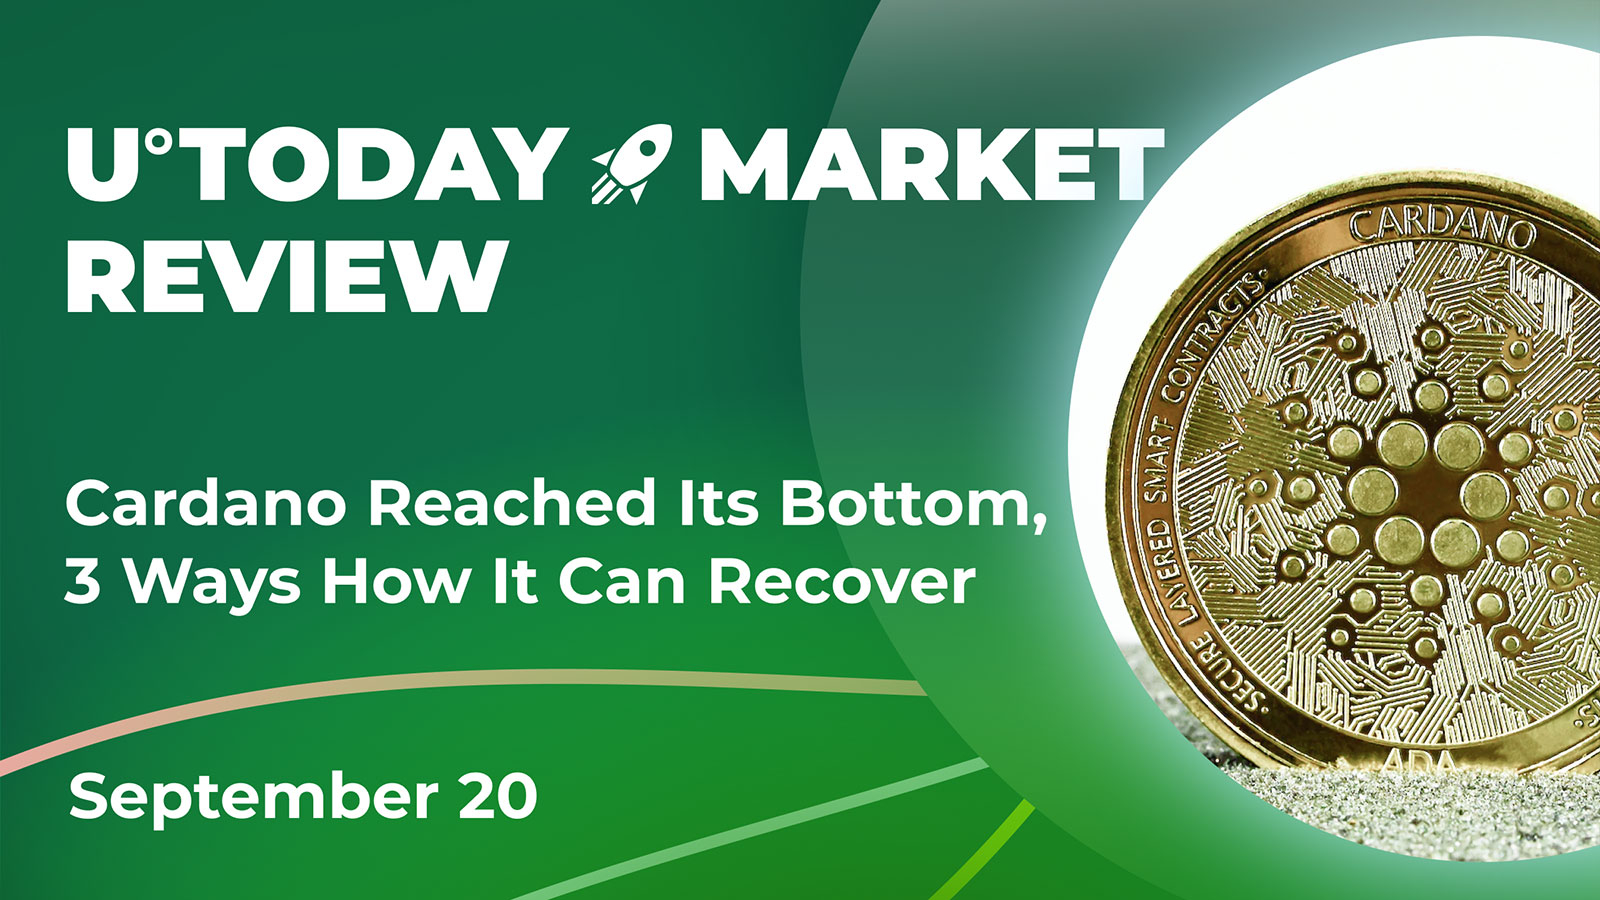 Cardano Reached Its Bottom, 3 Ways It Can Recover: Crypto Market Review, September 20